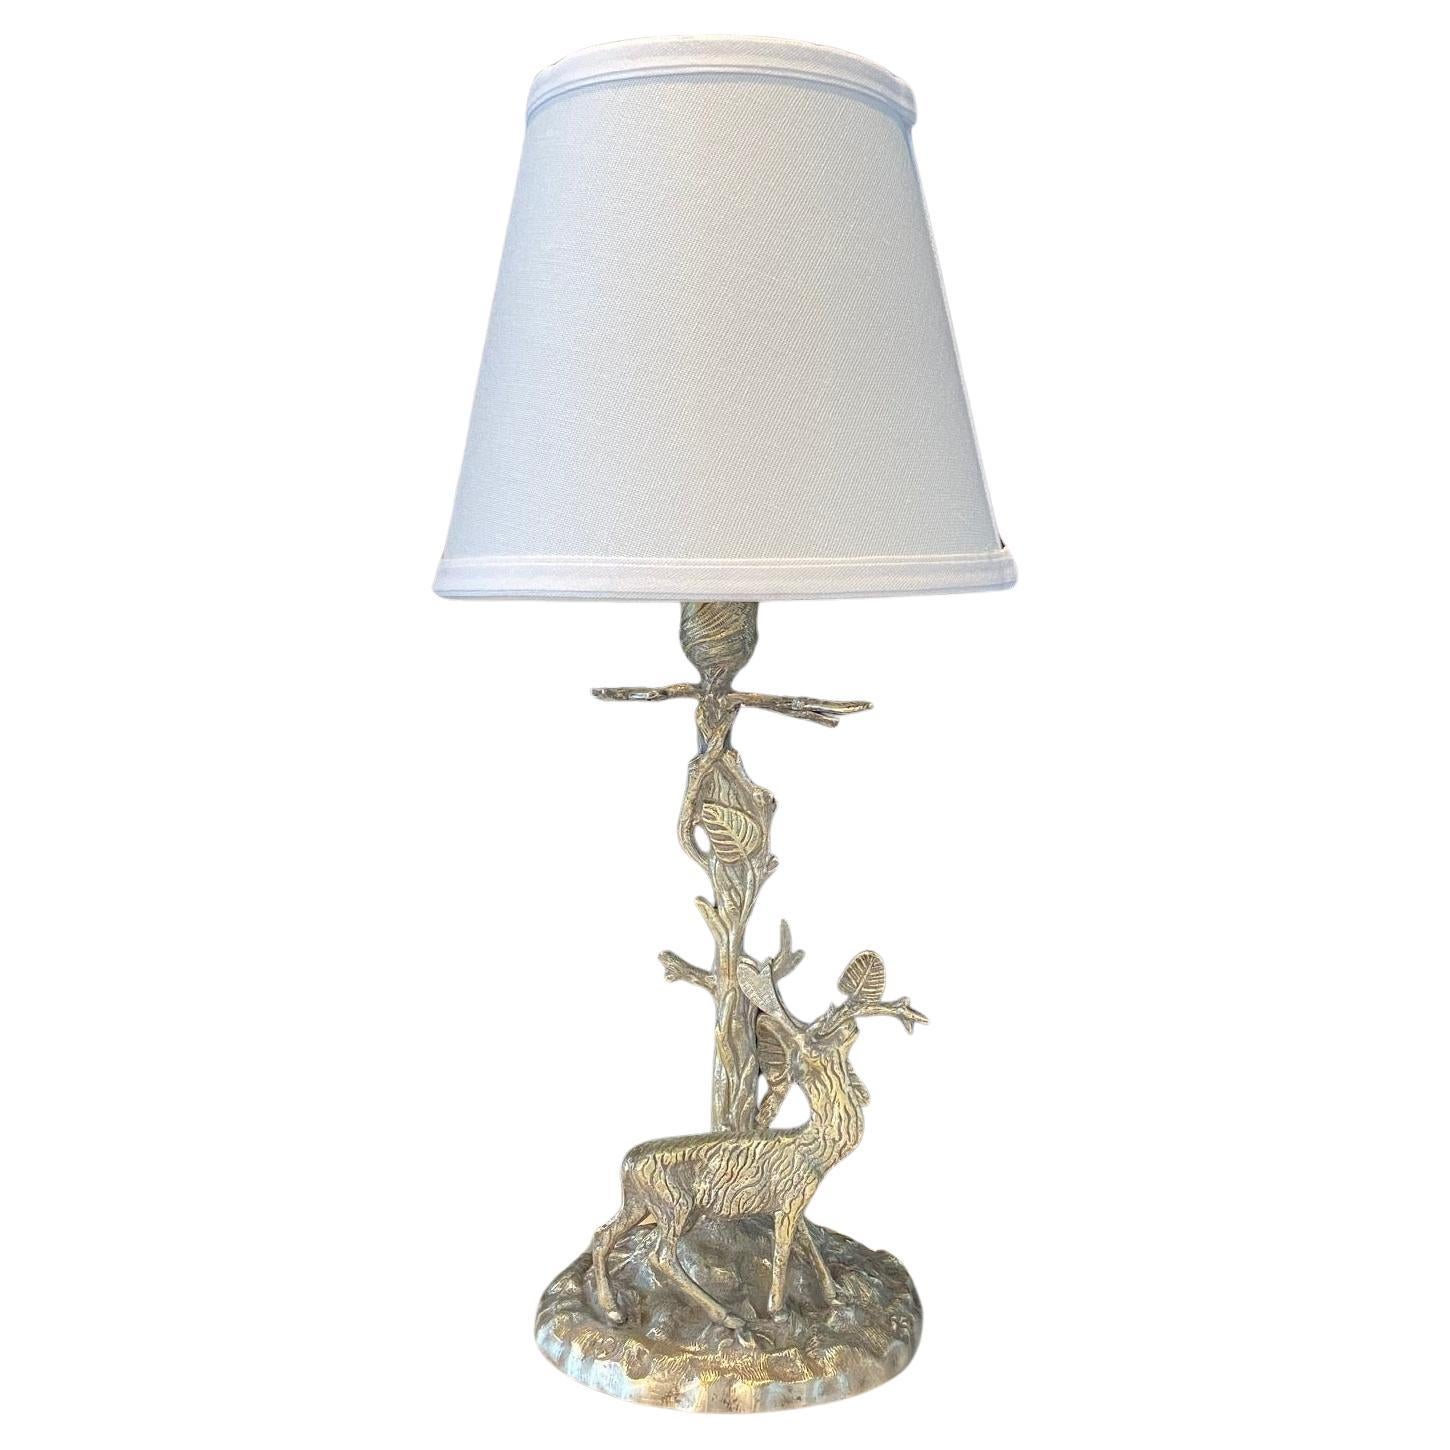  Silver Plated Bronze Deer Sculpture Table Lamp with Leaves and Twigs 